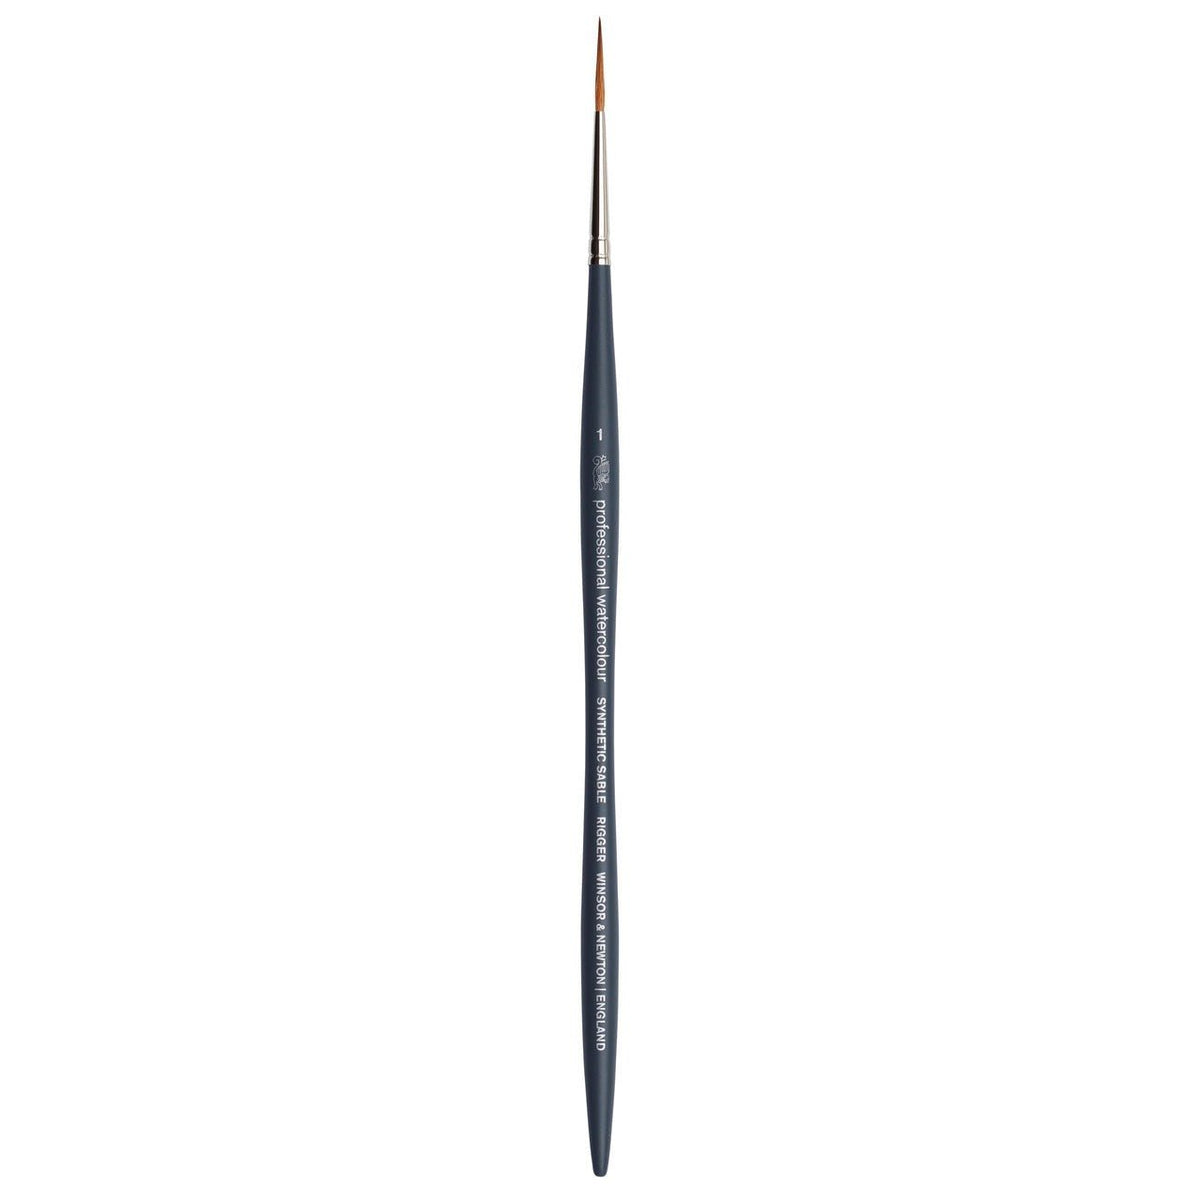 Winsor & Newton Professional Watercolor Synthetic Sable Brush - Rigger 1 - merriartist.com